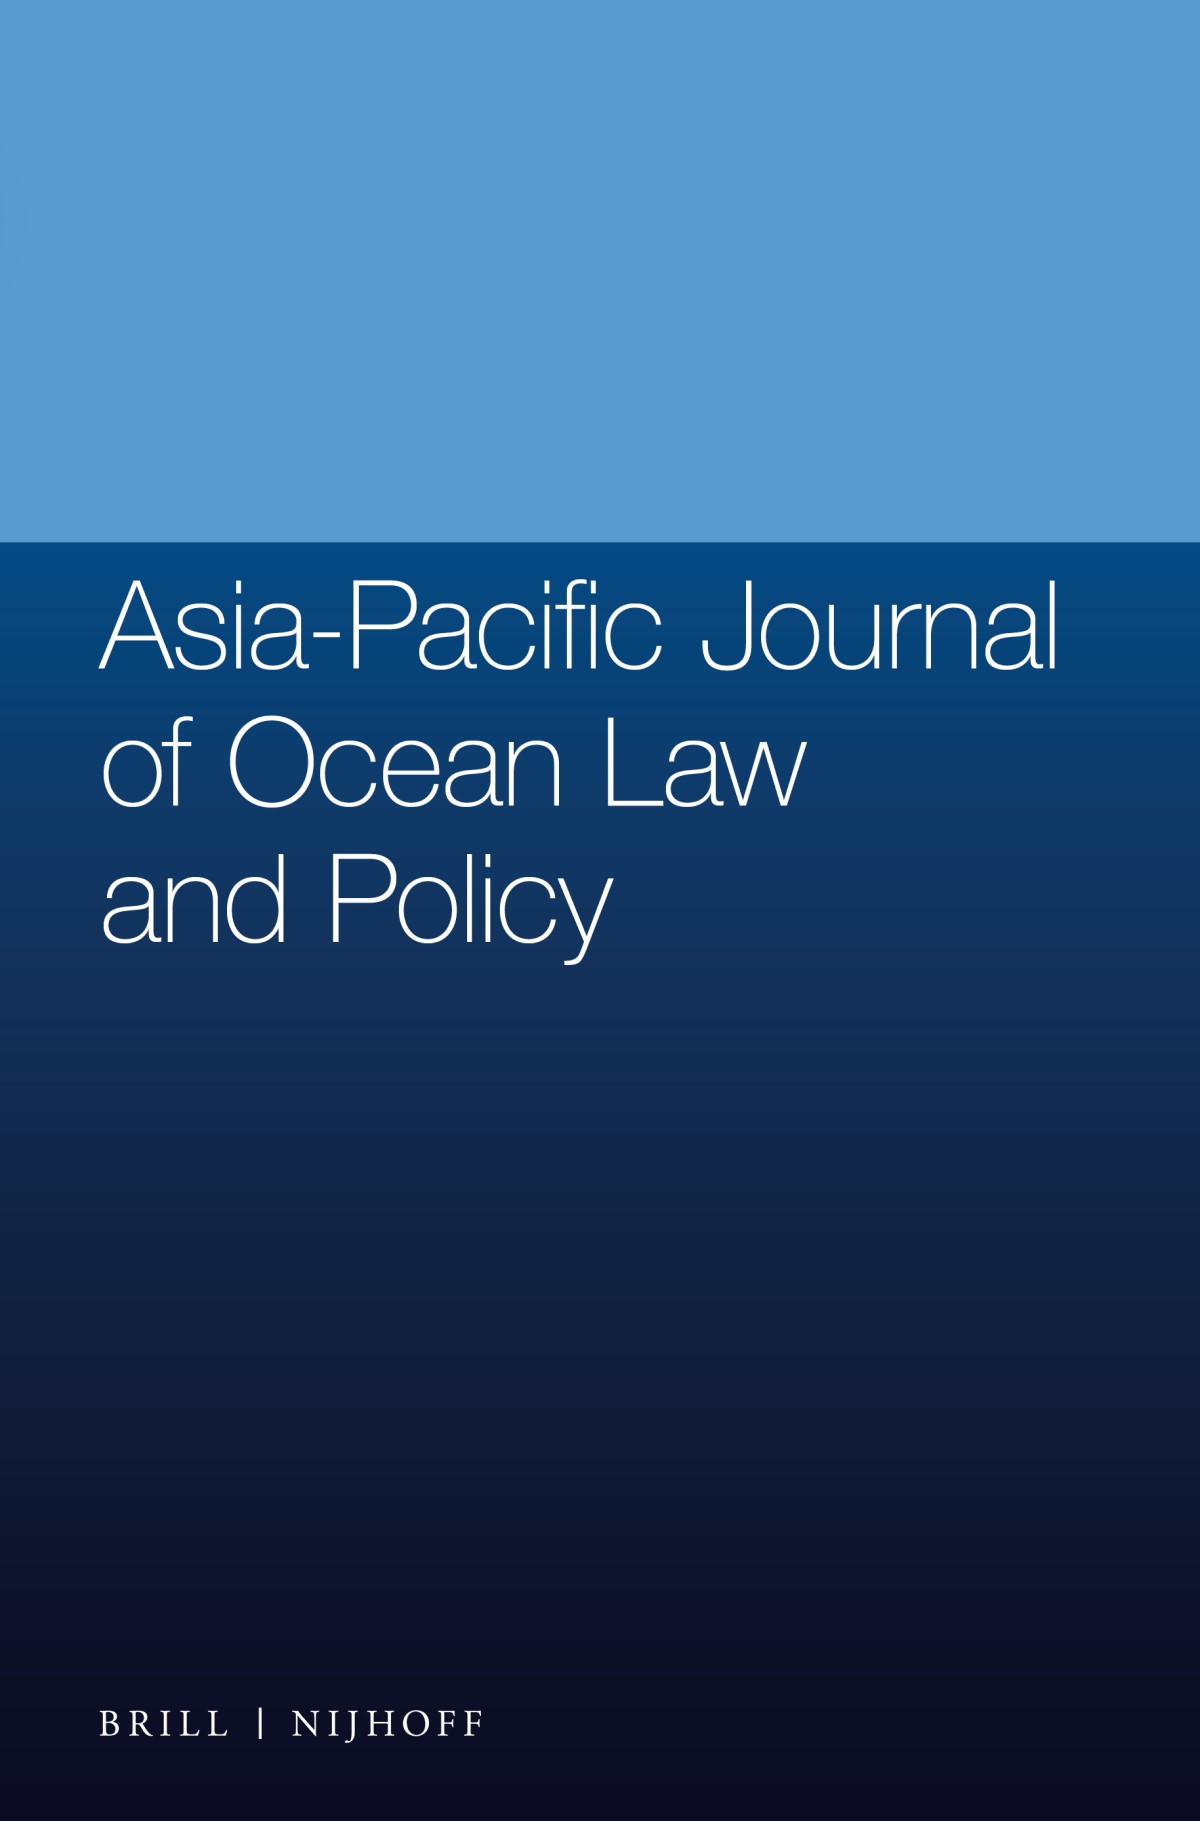 Asia-Pacific-Journal-Ocean-Law-Policy-Cover